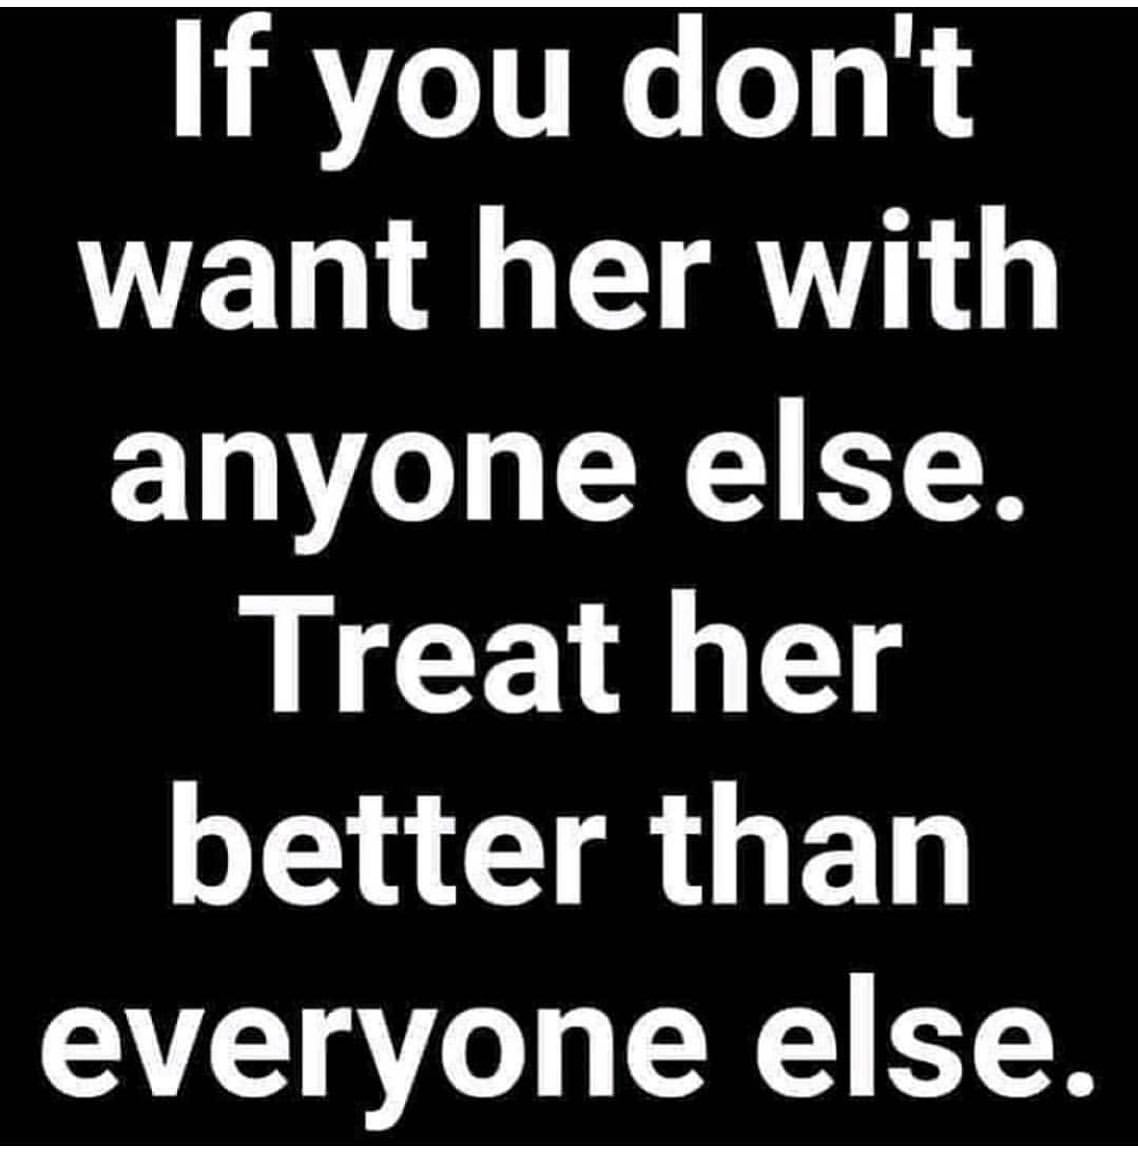 If you don't want her with anyone else. Treat her better than everyone else.